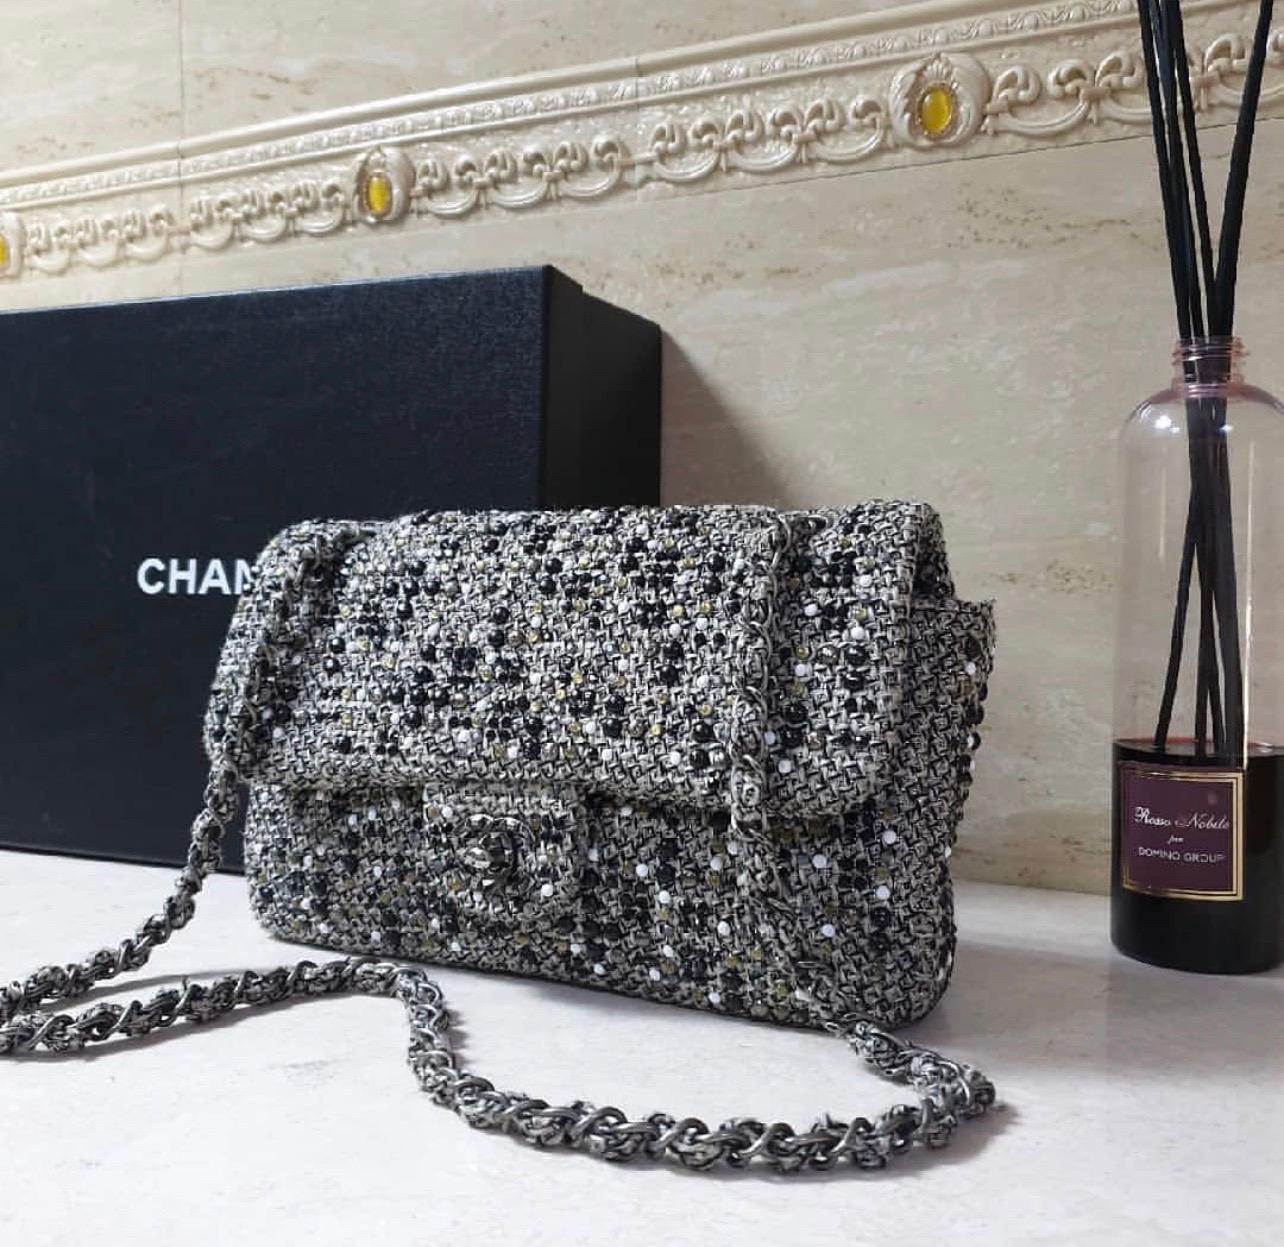 CHANEL Timeless Tweed Rhinestone Flap Bag Handbag

The original CHANEL Timeless Tweed rhinestone flap bag handbag is an elaborately processed handbag in the typical timeless style of Chanel. It is made of high-quality woven tweed fabric and features